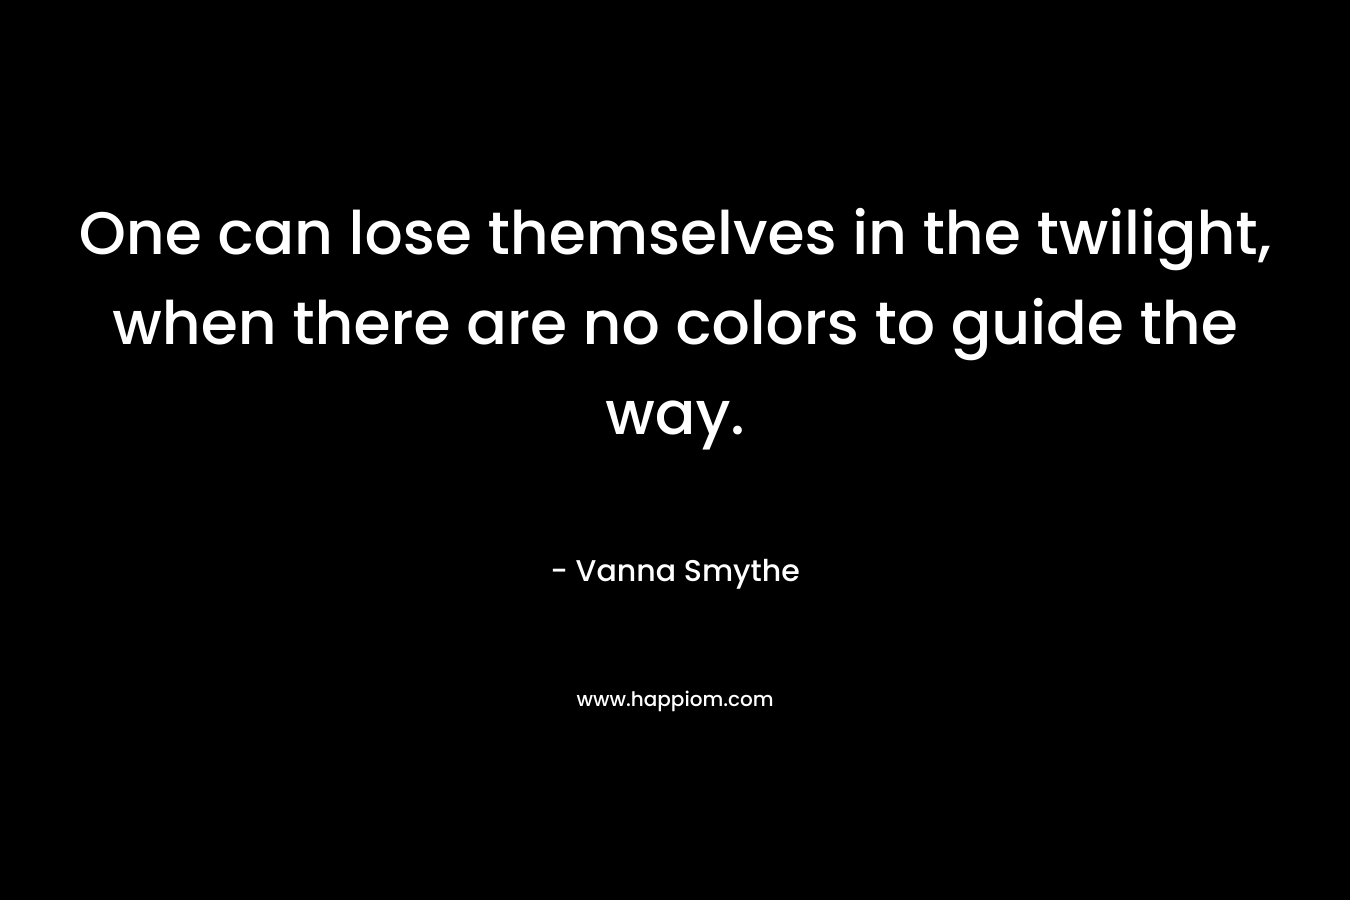 One can lose themselves in the twilight, when there are no colors to guide the way.